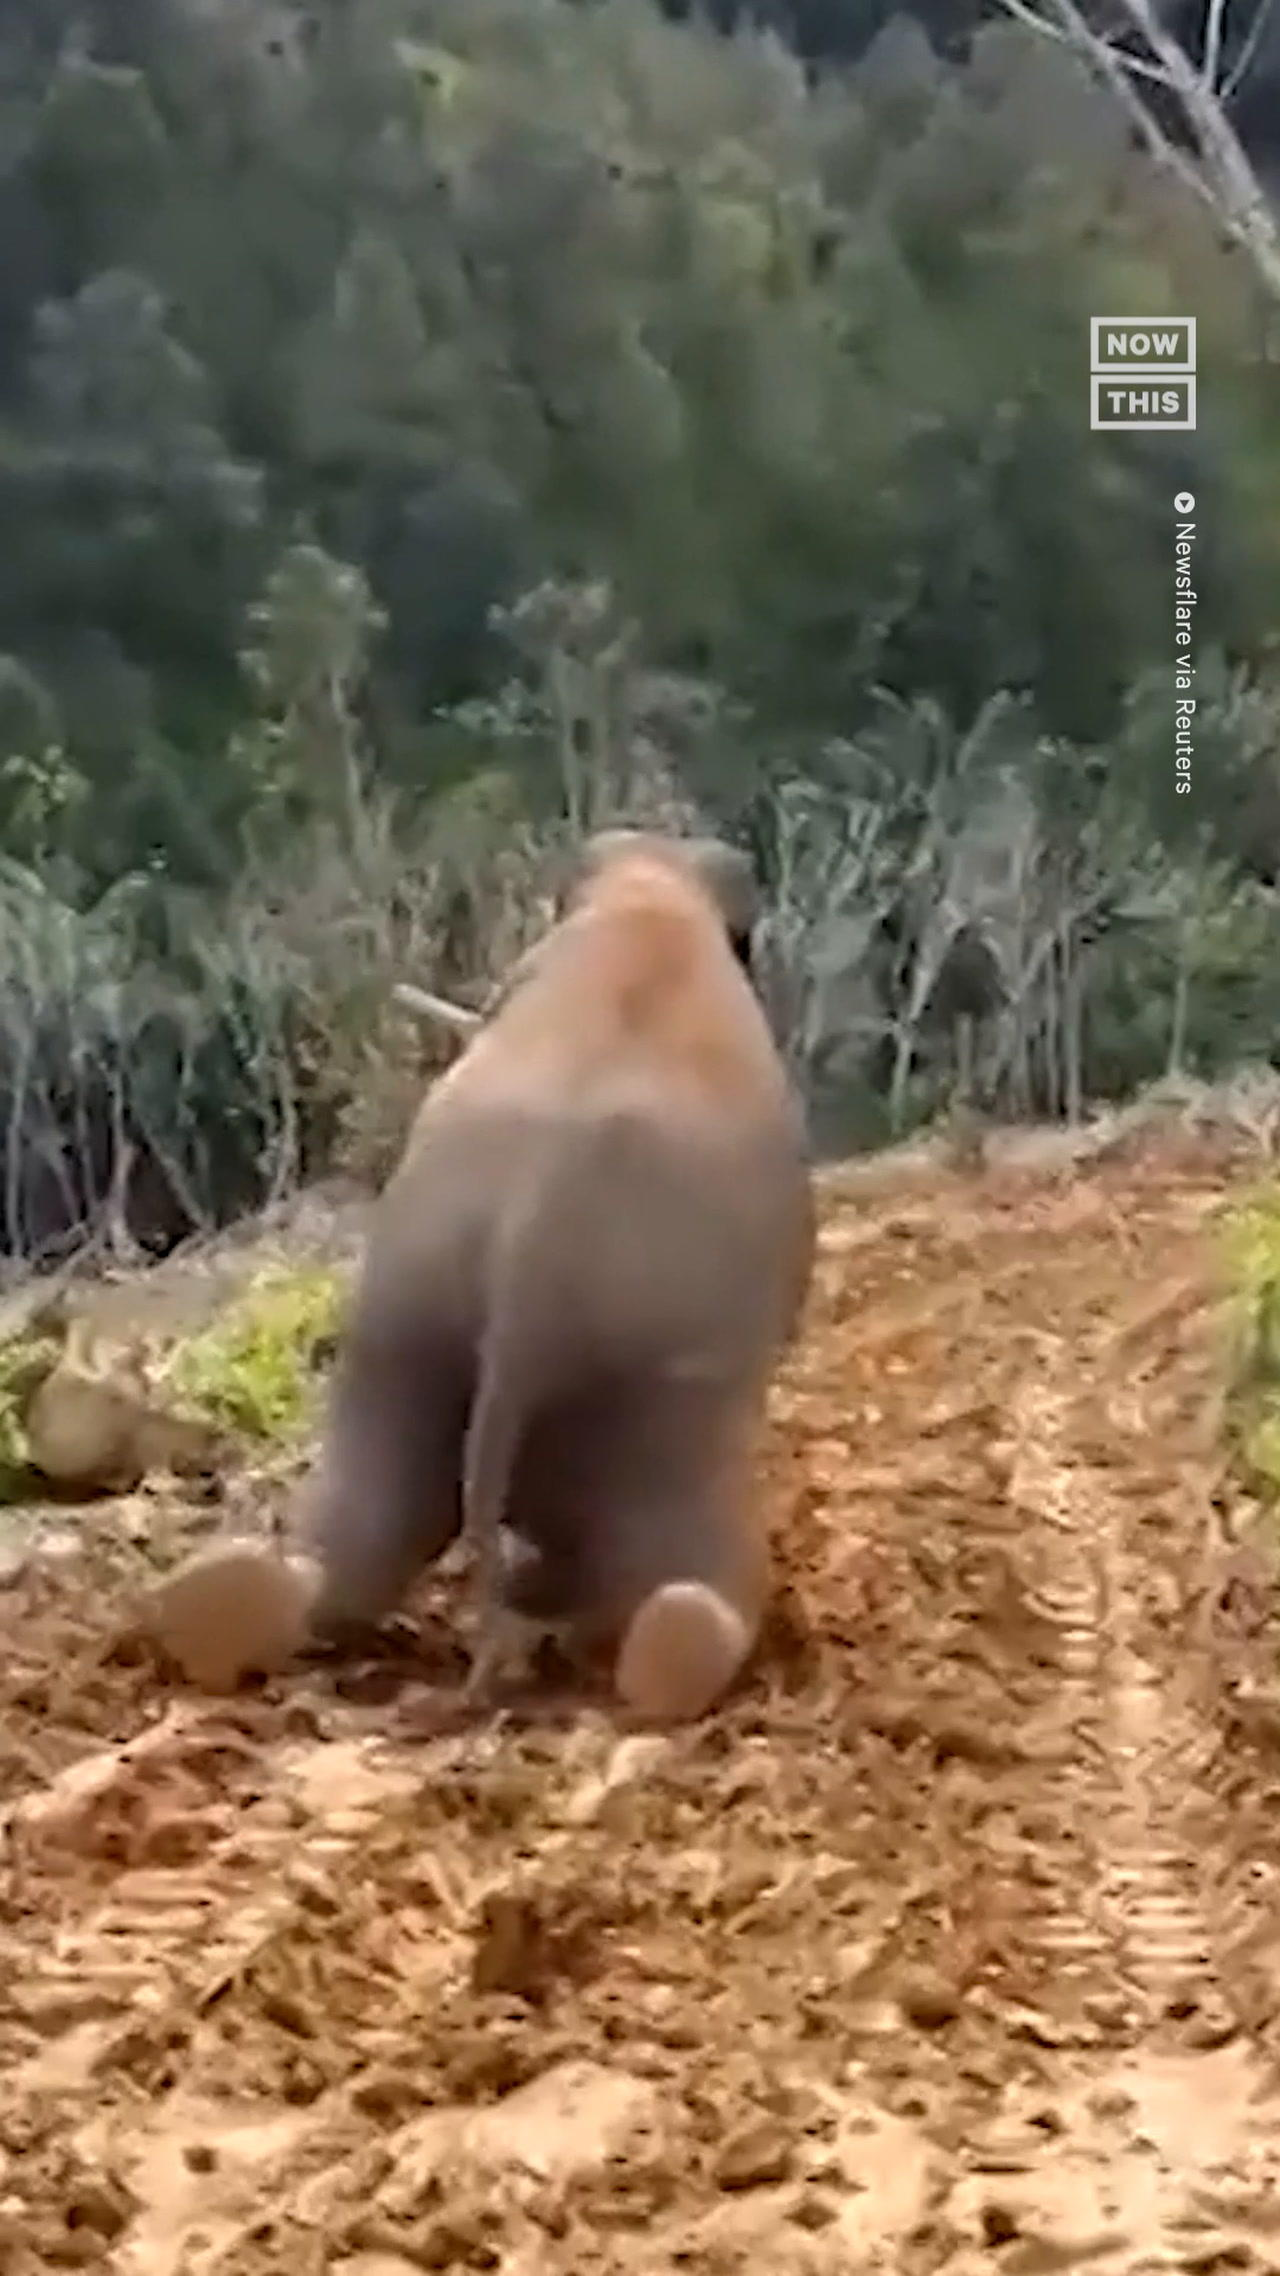 Elephant Has Some Fun in the Mud After Rainstorm